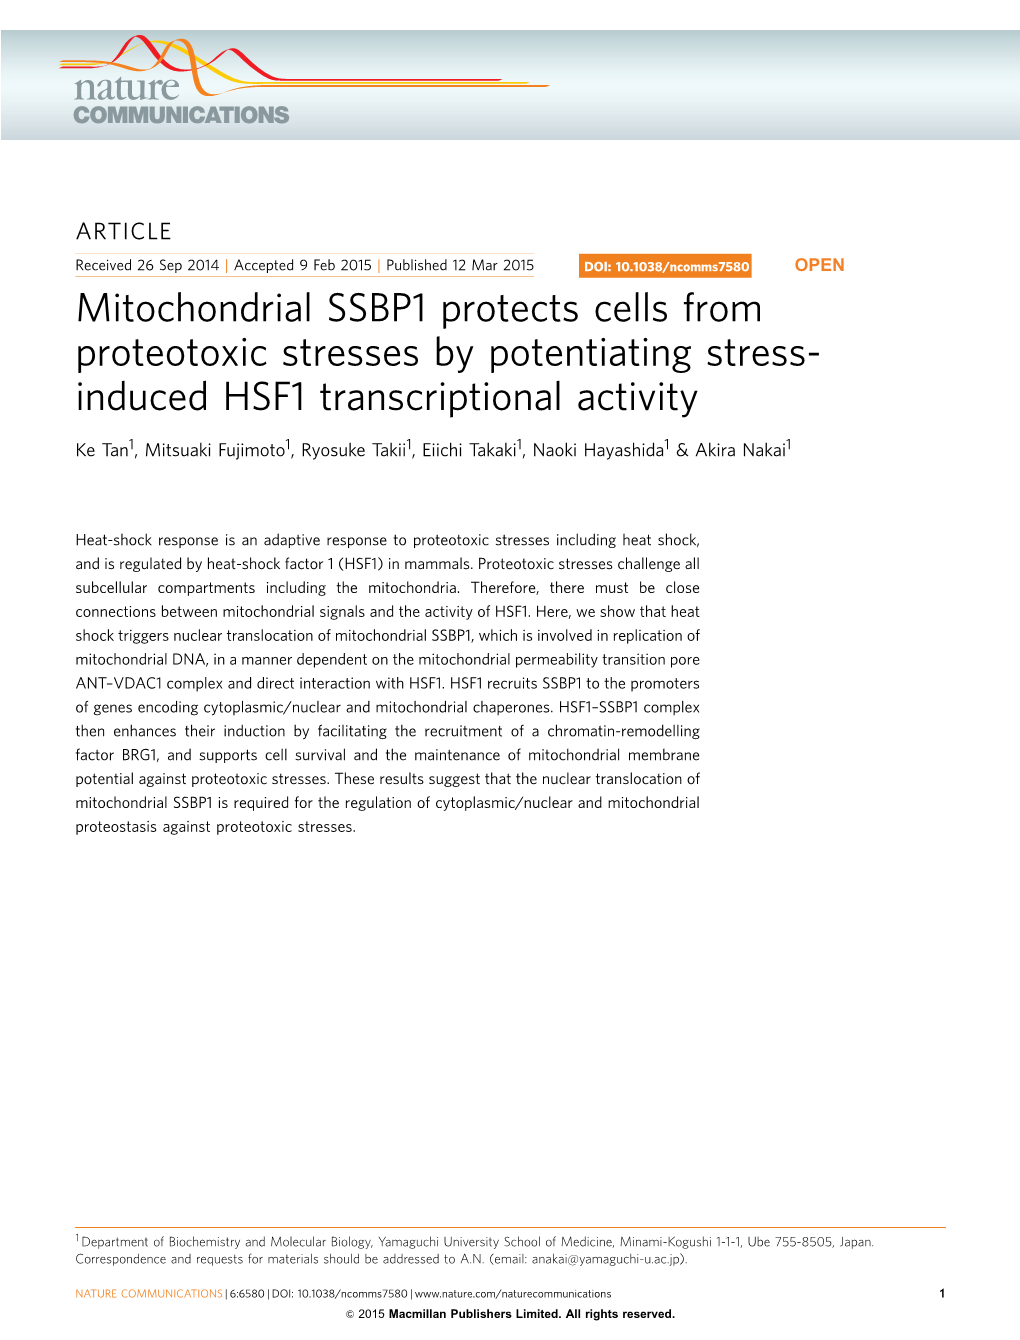 Mitochondrial SSBP1 Protects Cells from Proteotoxic Stresses by Potentiating Stress-Induced HSF1 Transcriptional Activity